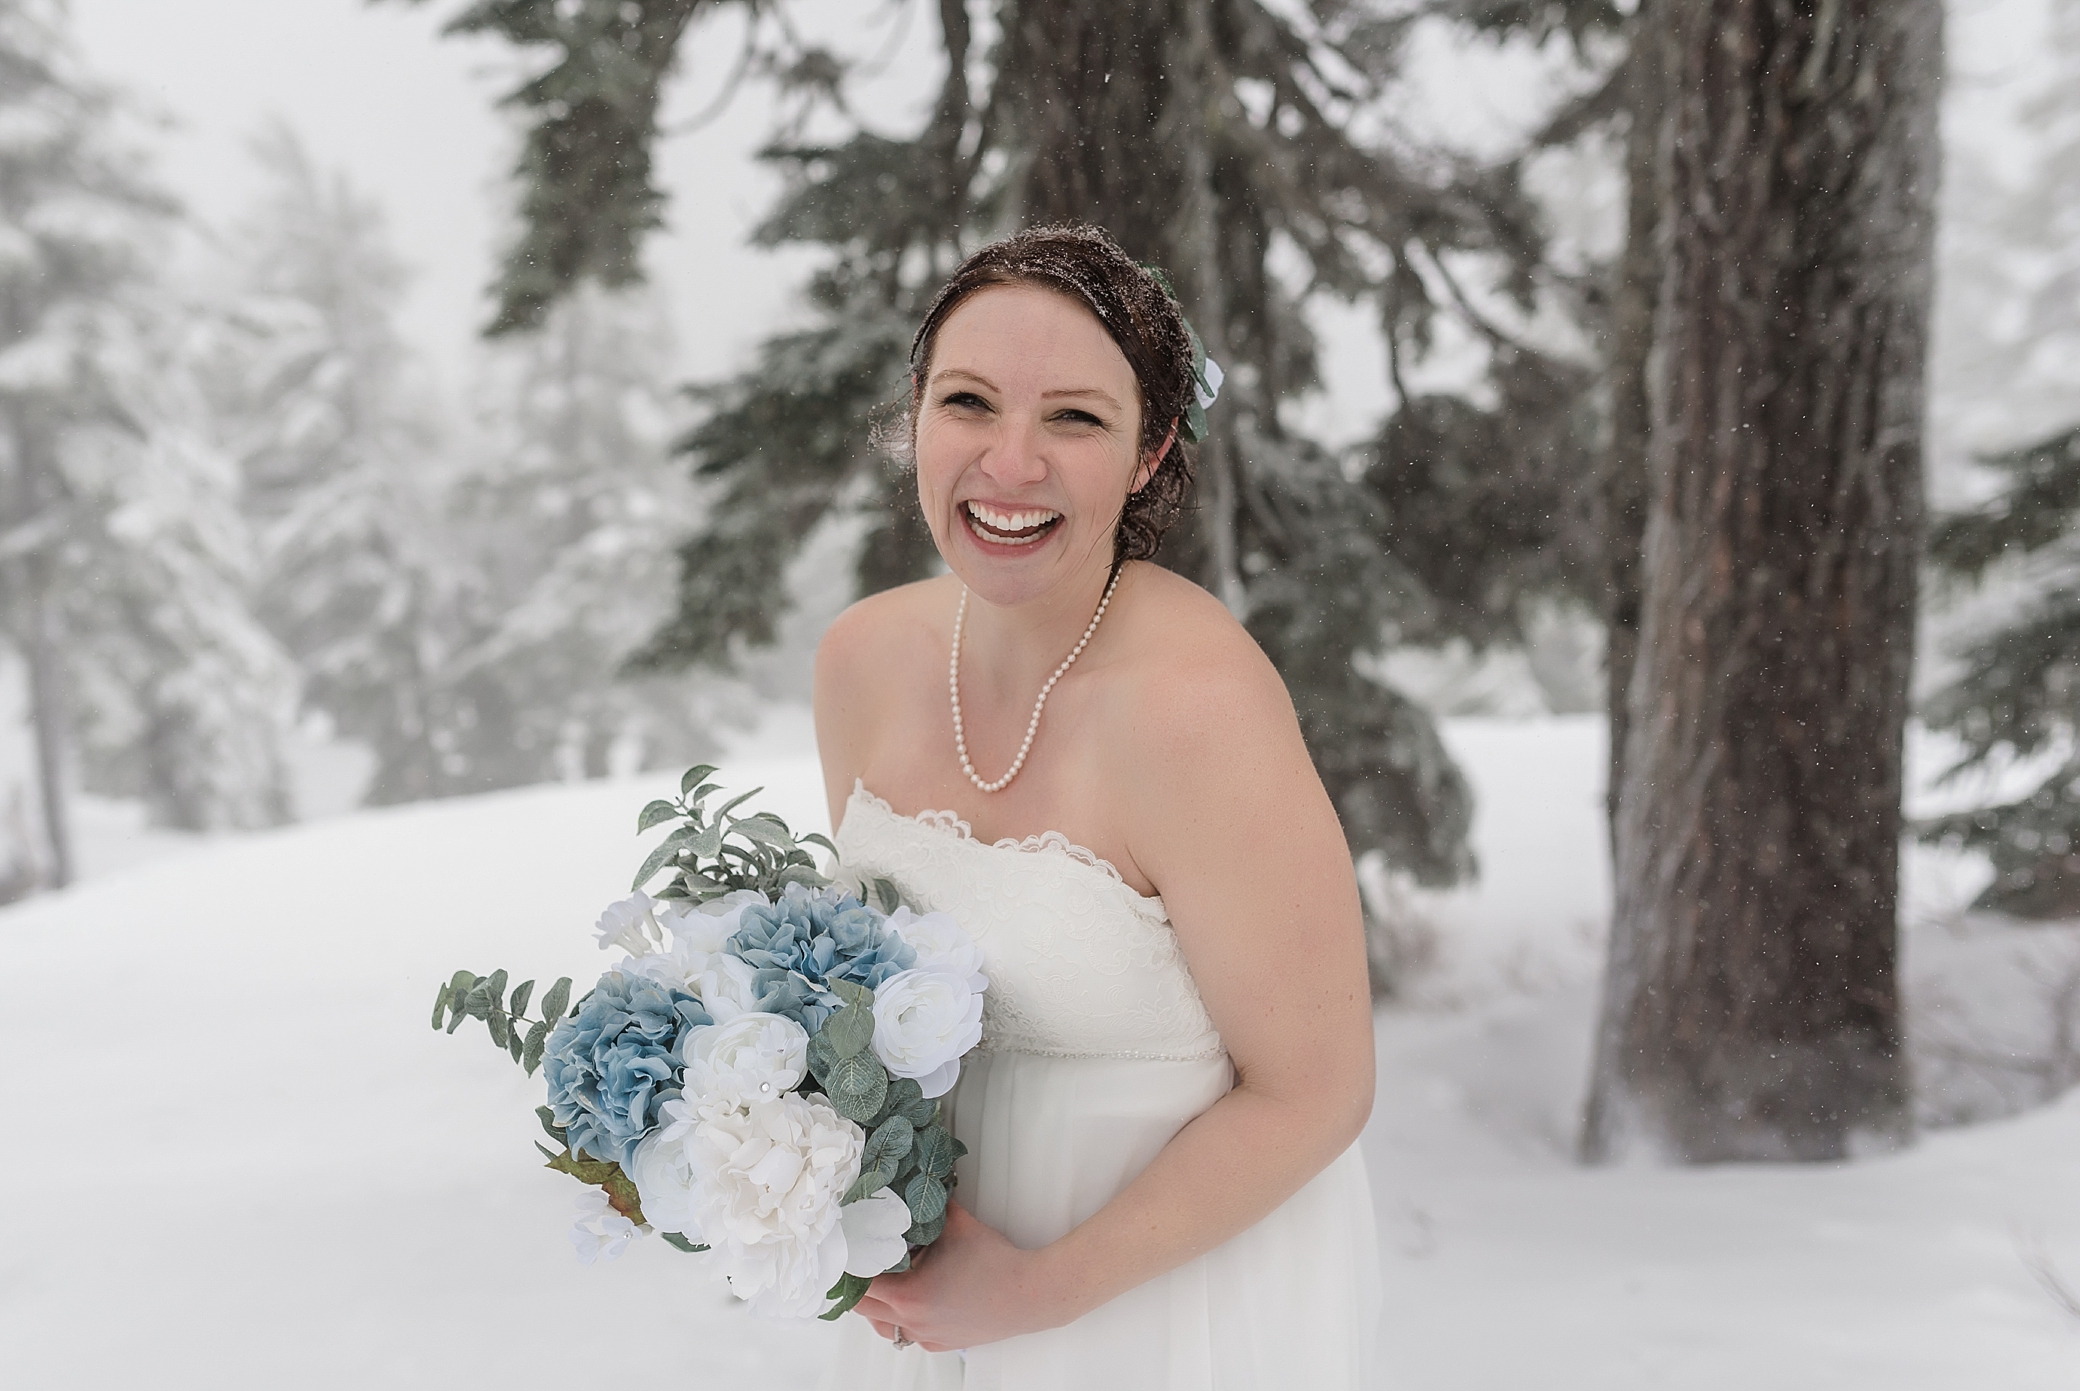 Bride in the Snow at Mount Baker | Megan Montalvo Photography 